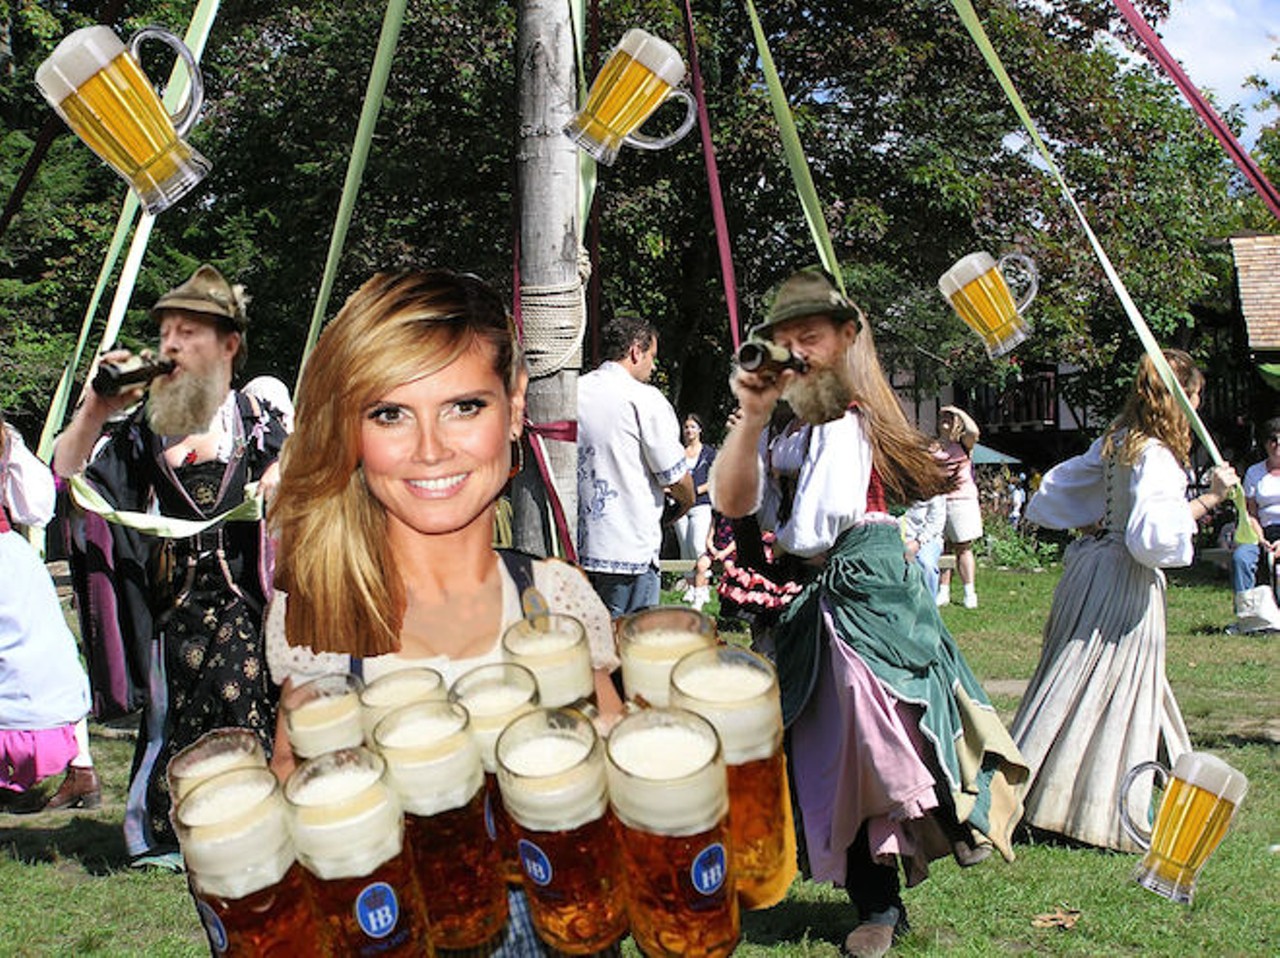 Saturday, April 26Maifest: Oktoberfest in the SpringFeaturing live German music, dancers, beer and food.